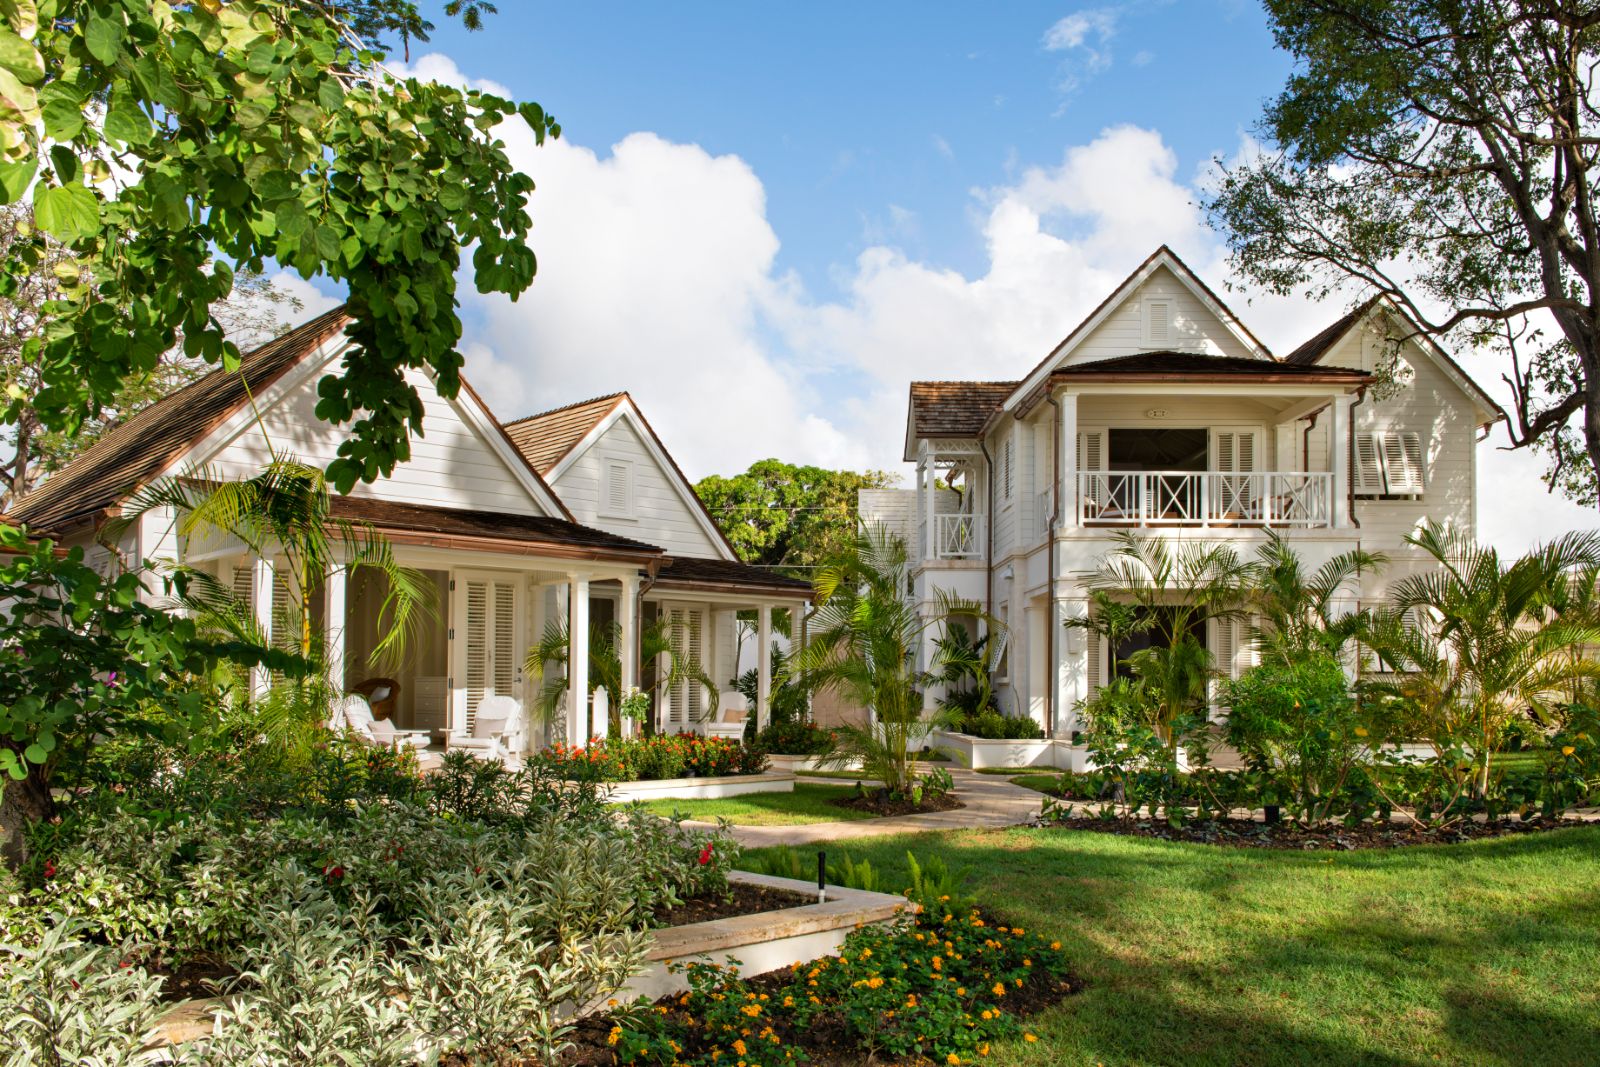 Front Exterior of The Great House, luxury villa in Barbados